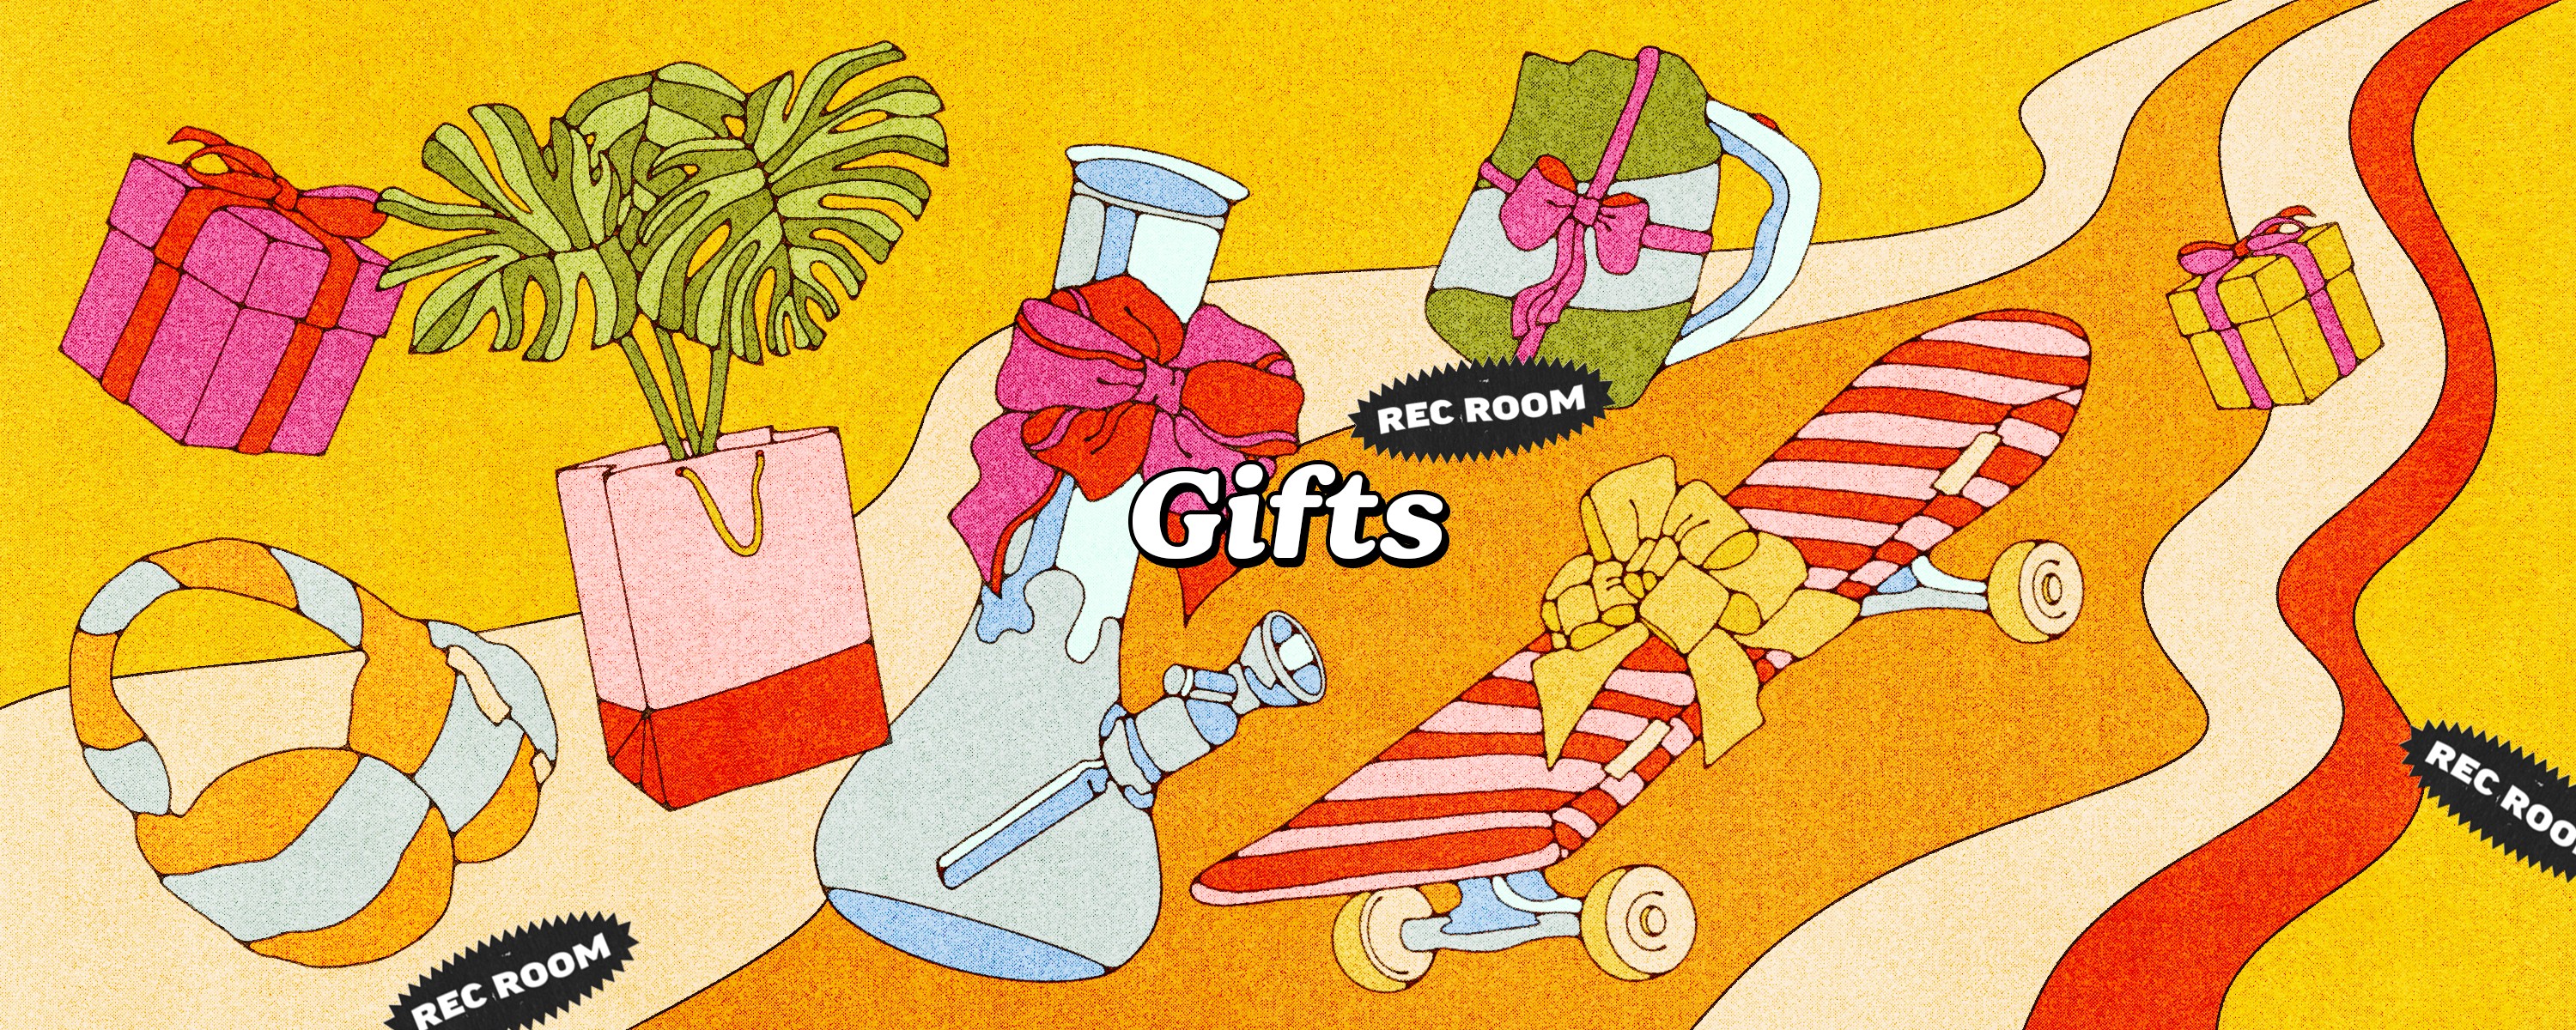 The Rec Room - gifting